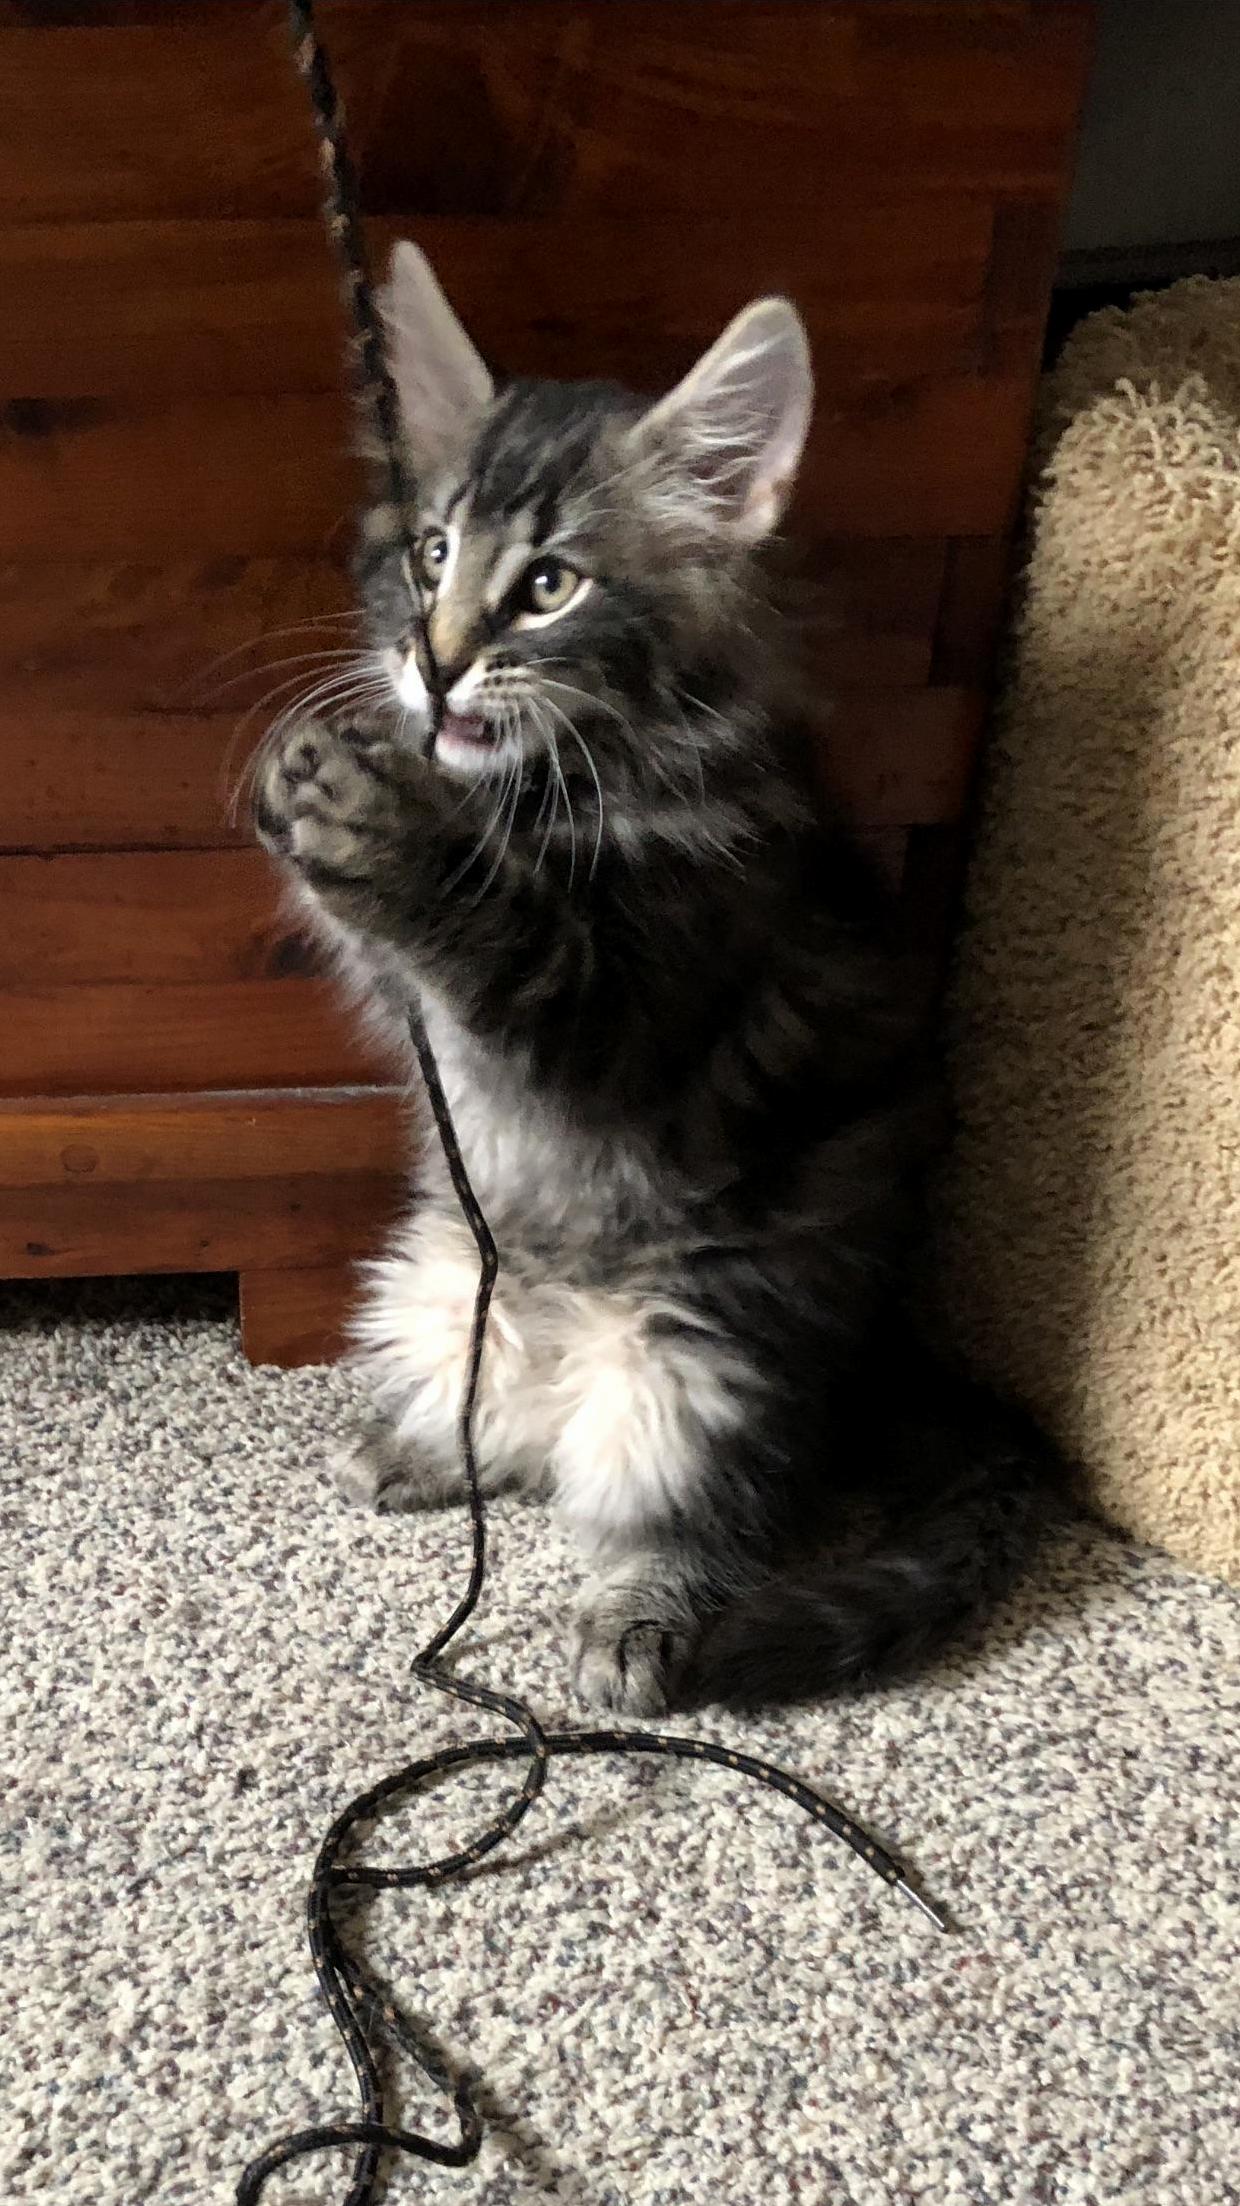 Our new norwegian forest cat, conan.